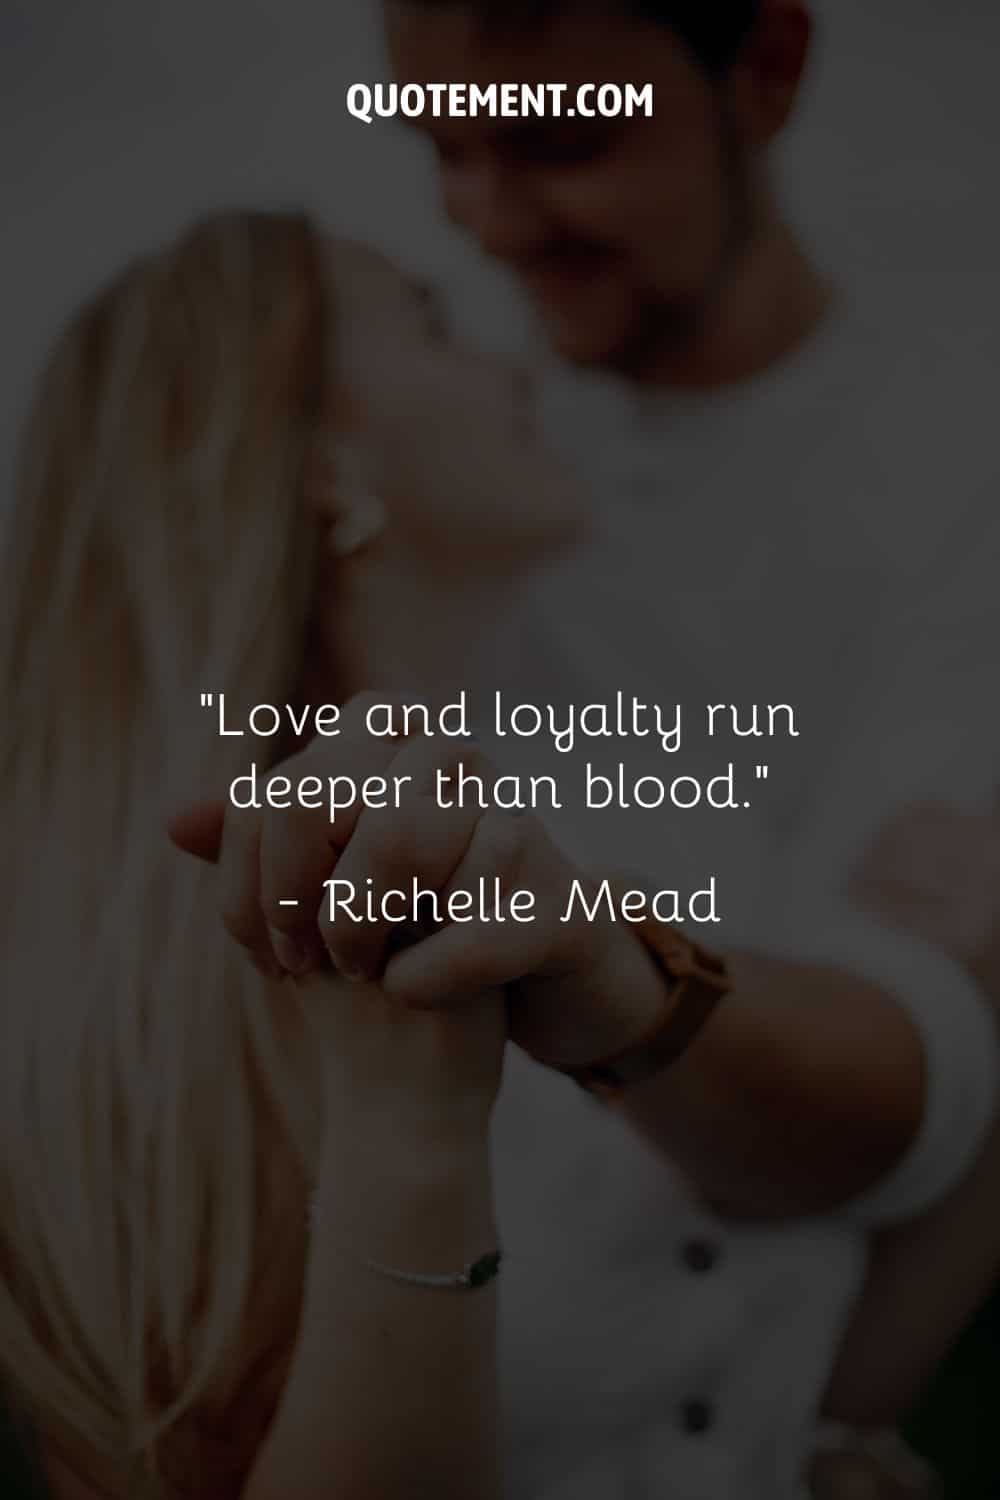 “Love and loyalty run deeper than blood.” — Richelle Mead